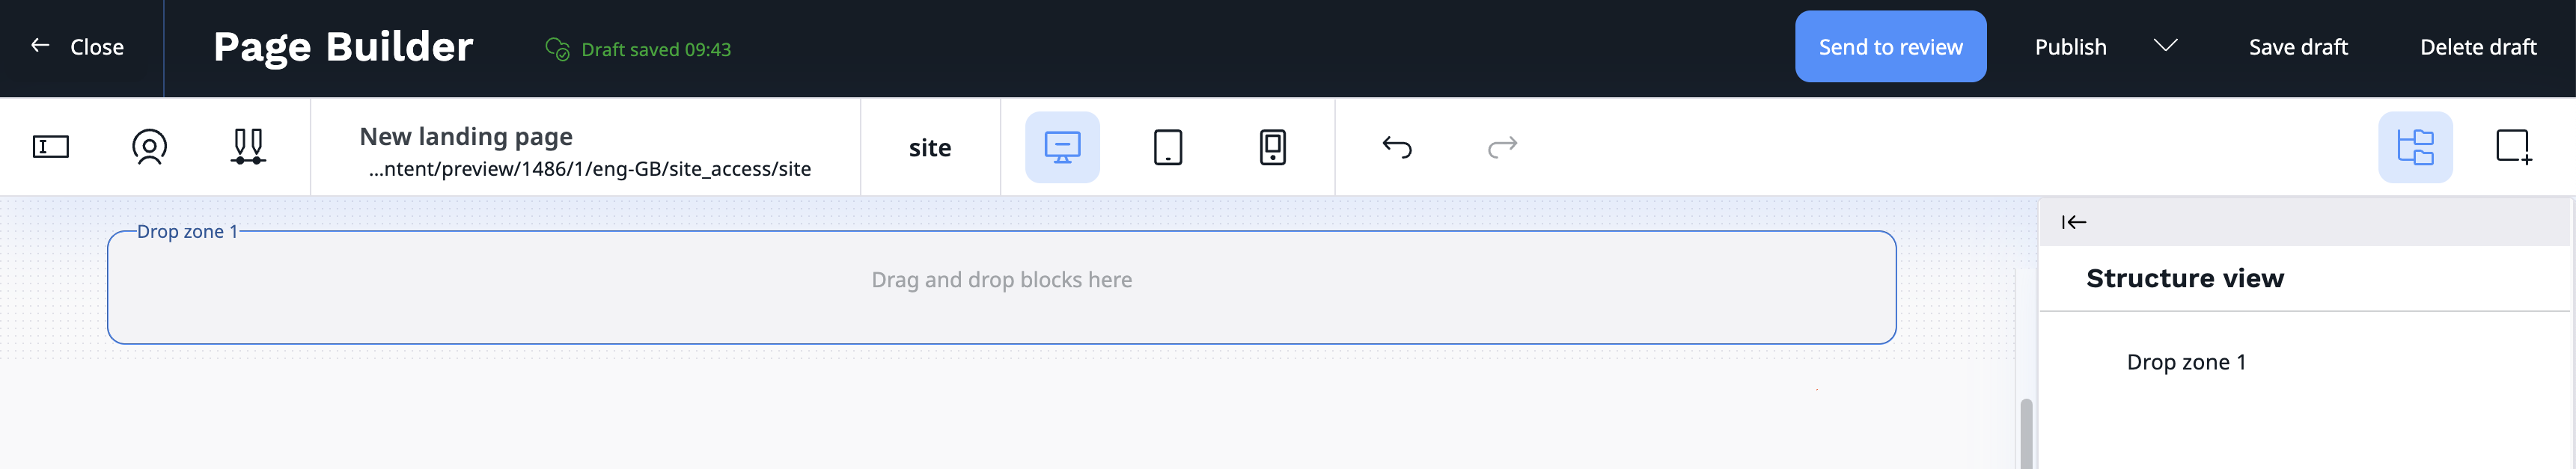 Page Builder interface